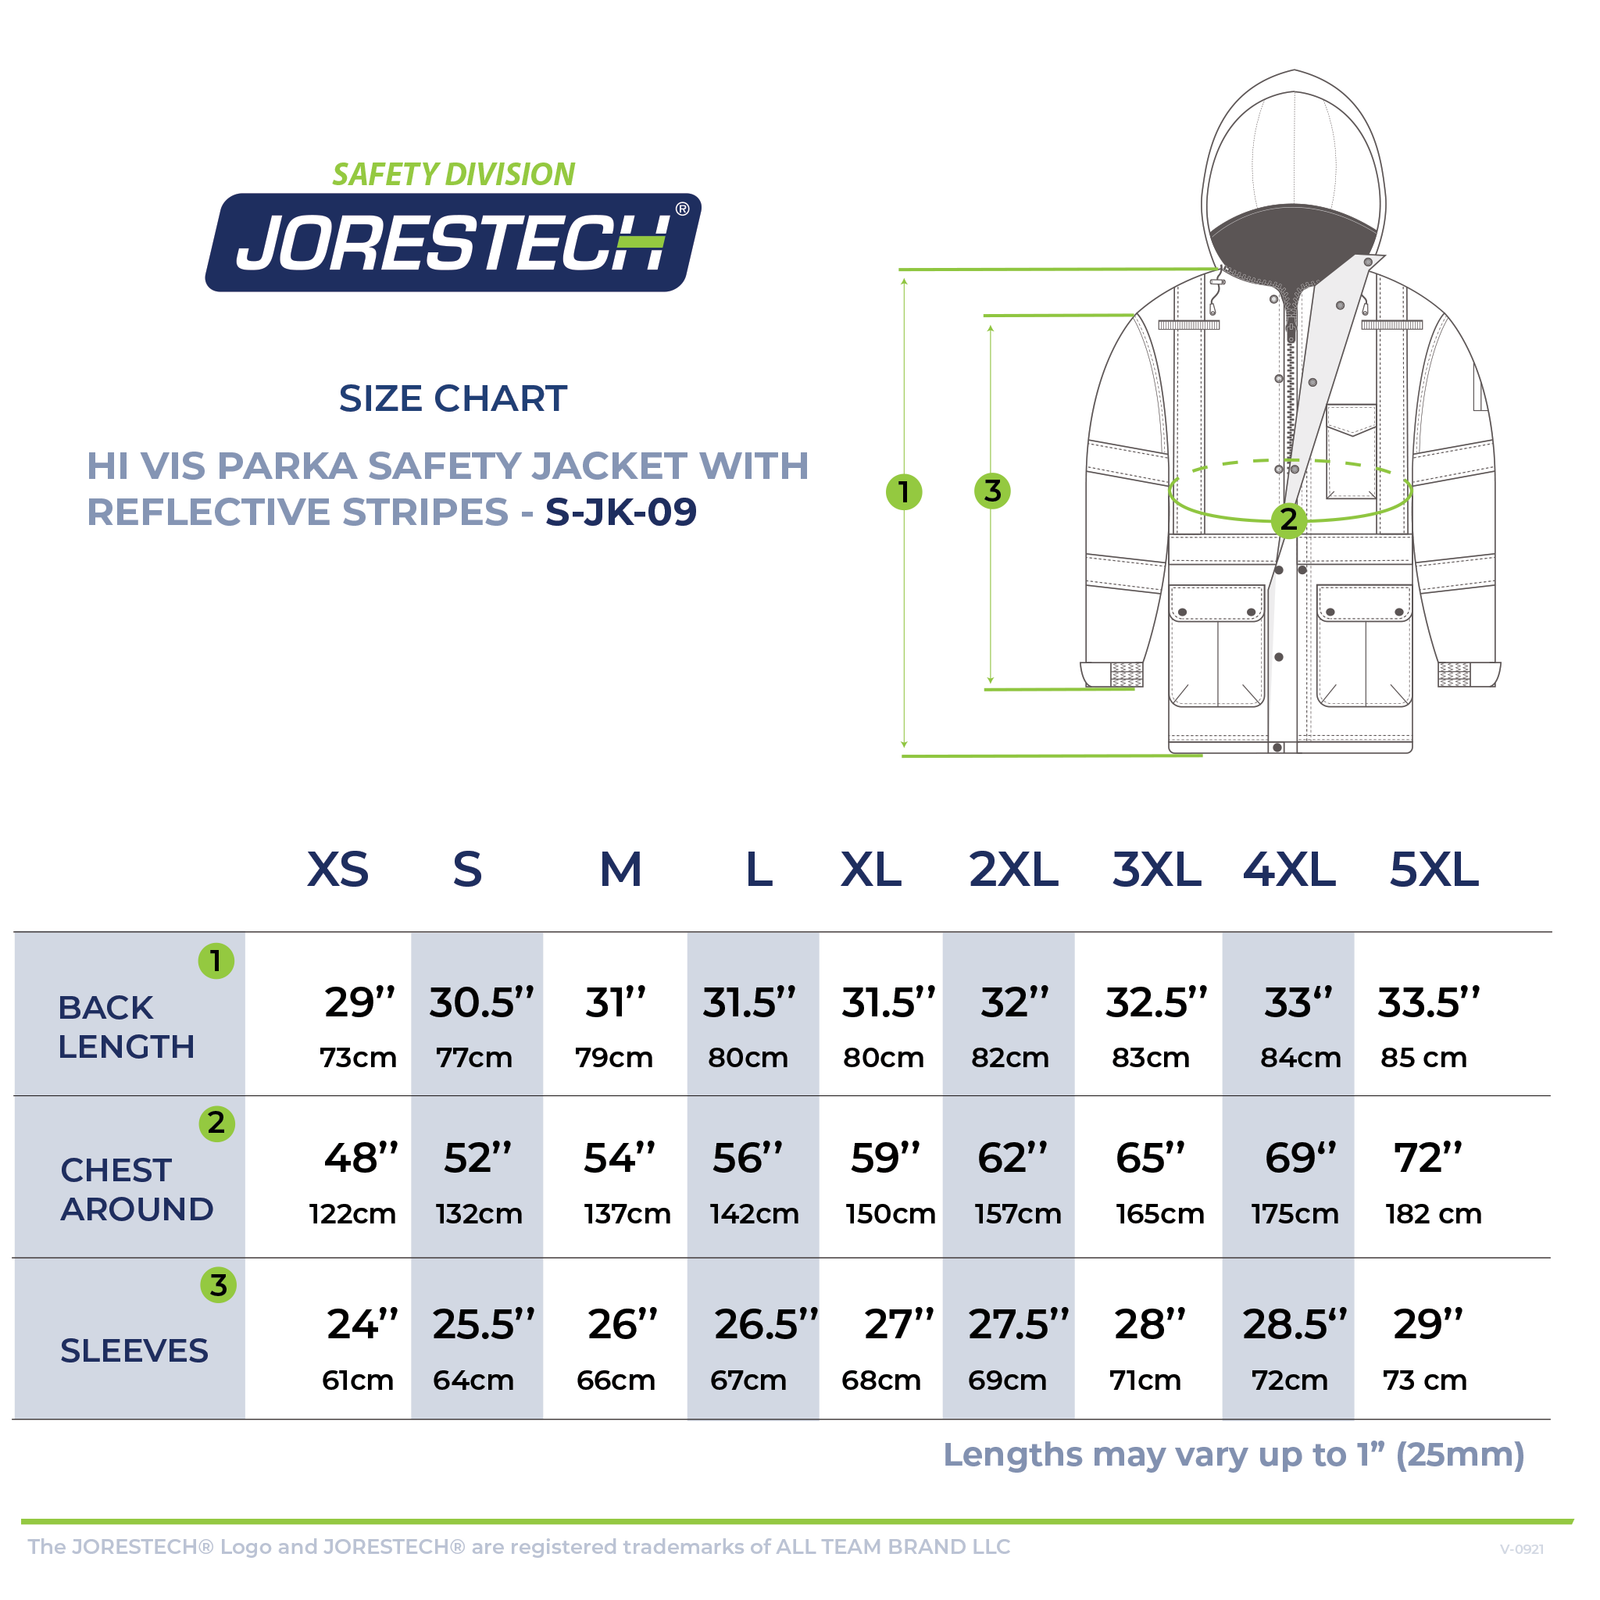 Size chart of the hi vis safety jacket with reflective stripes for winter